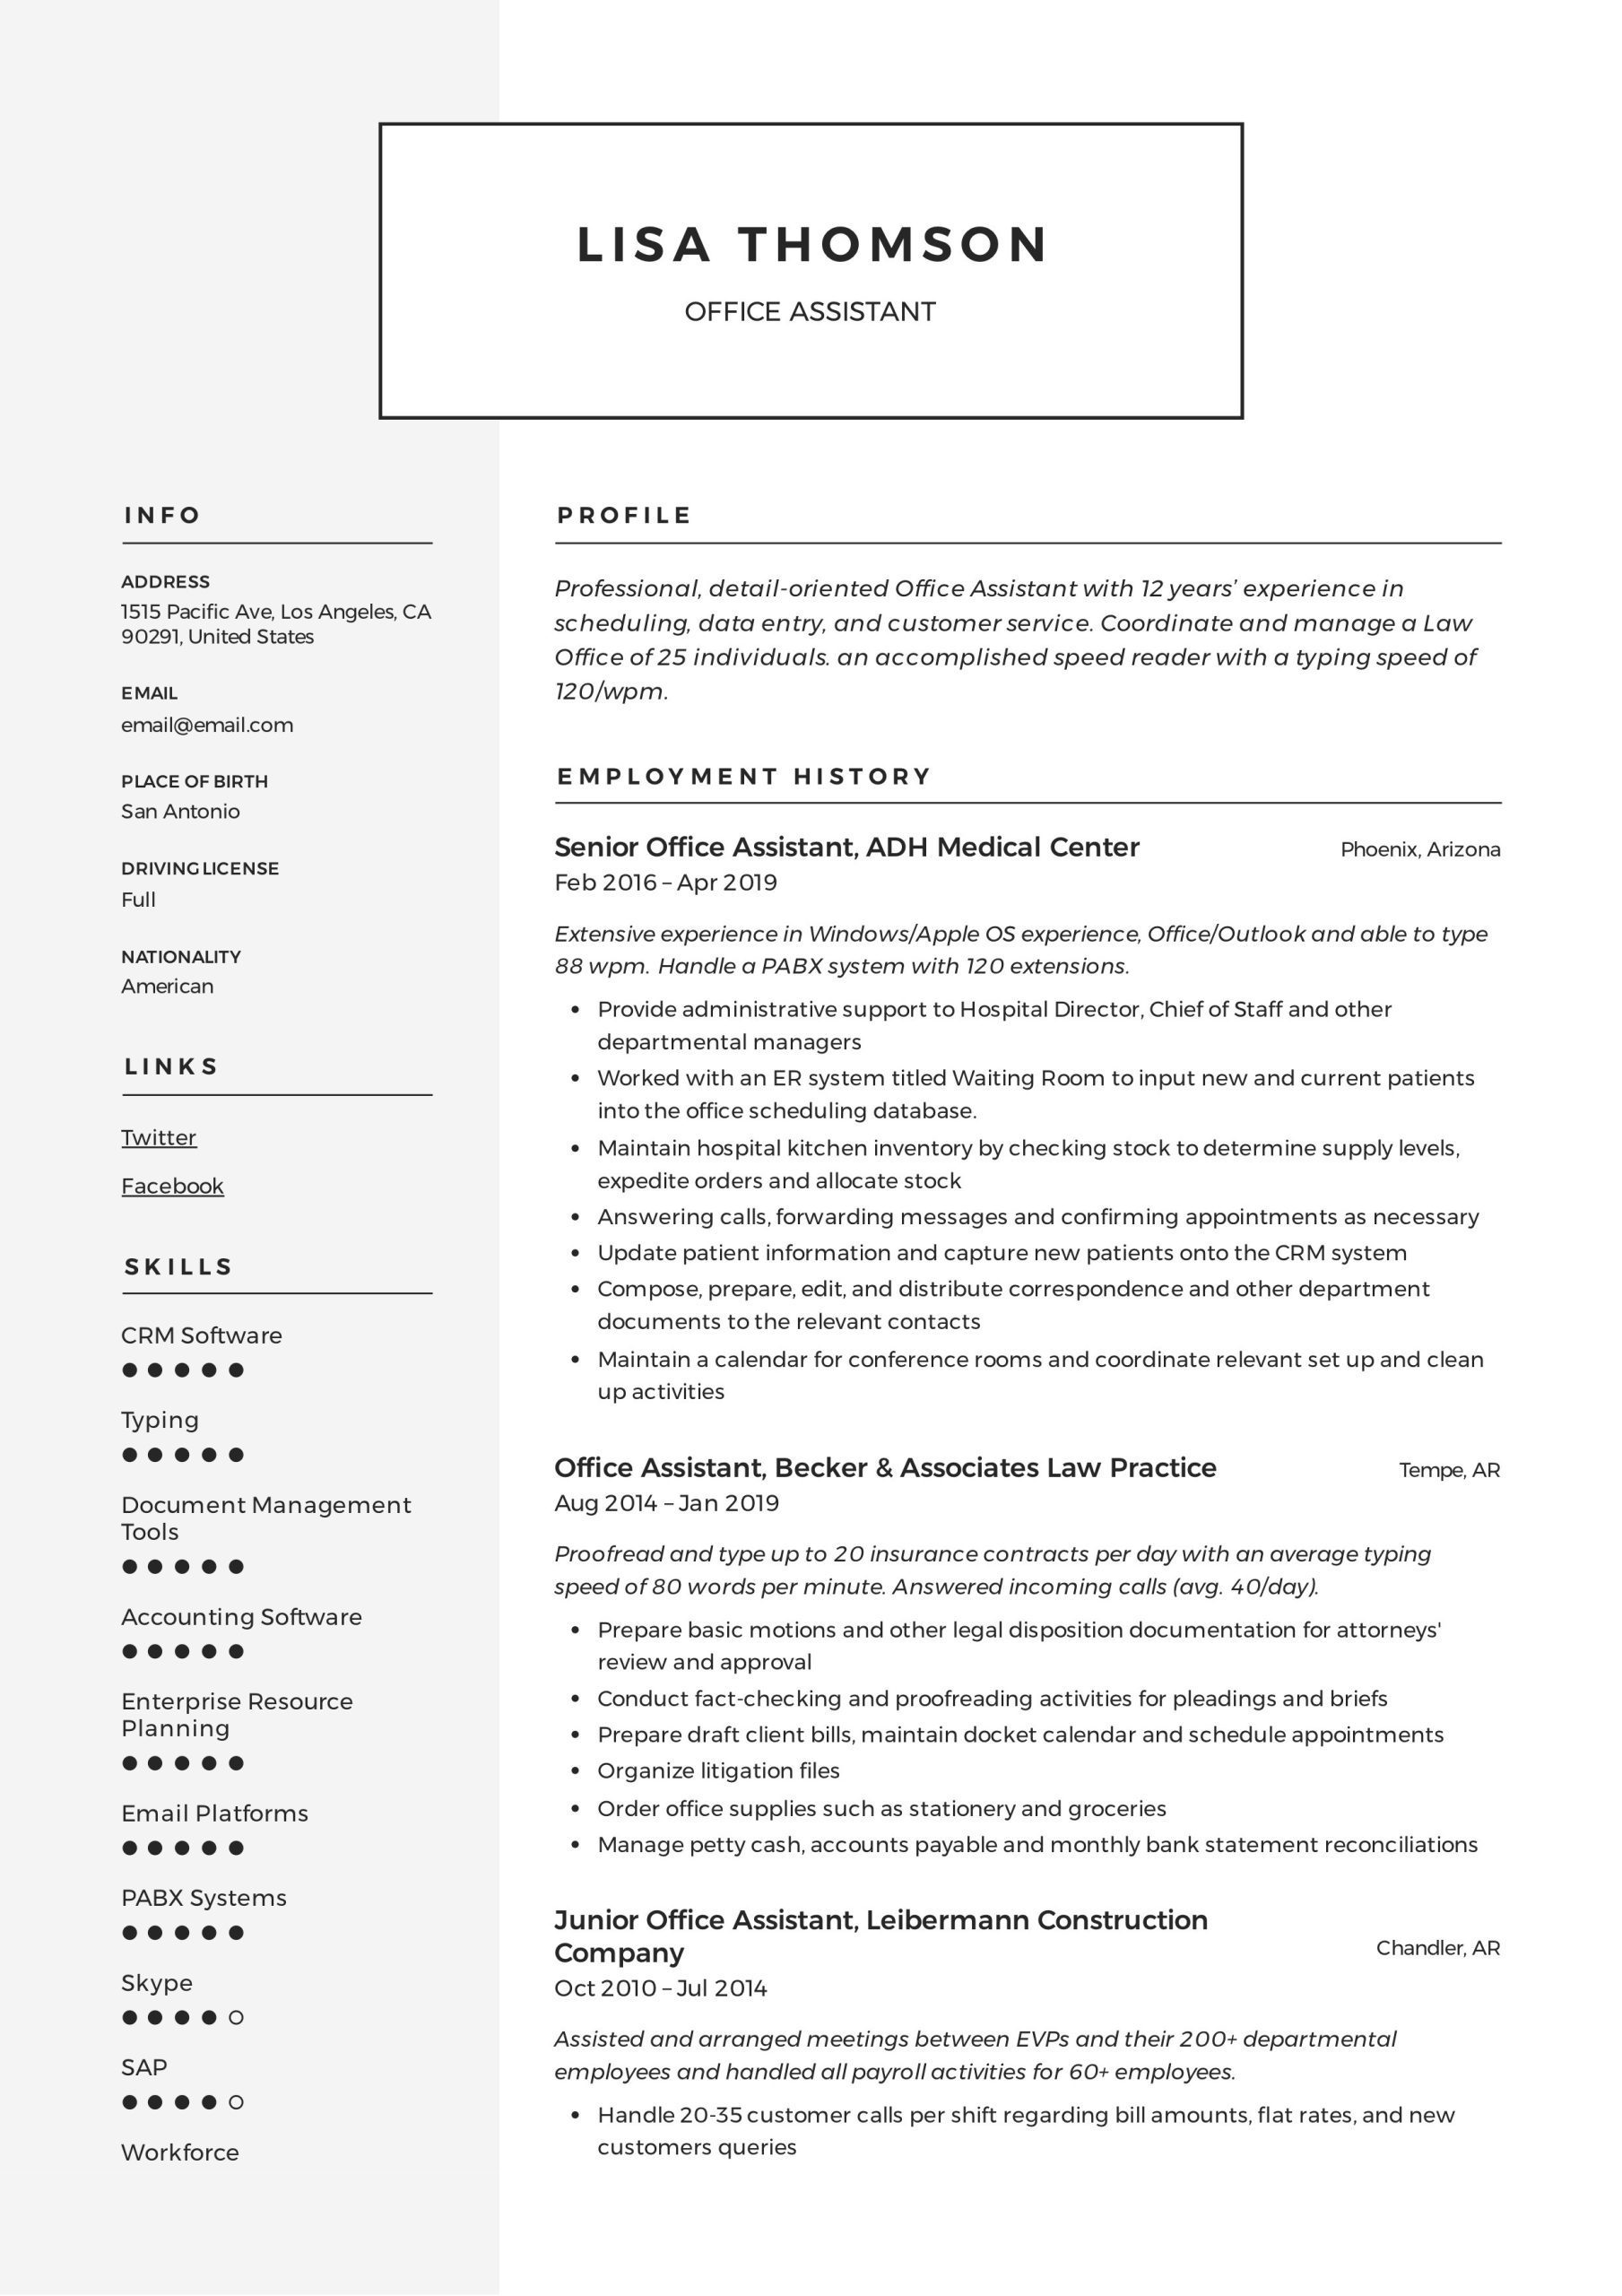 Law Firm Office assistant Resume Sample Office assistant Resume   Writing Guide 12 Resume Templates 2020